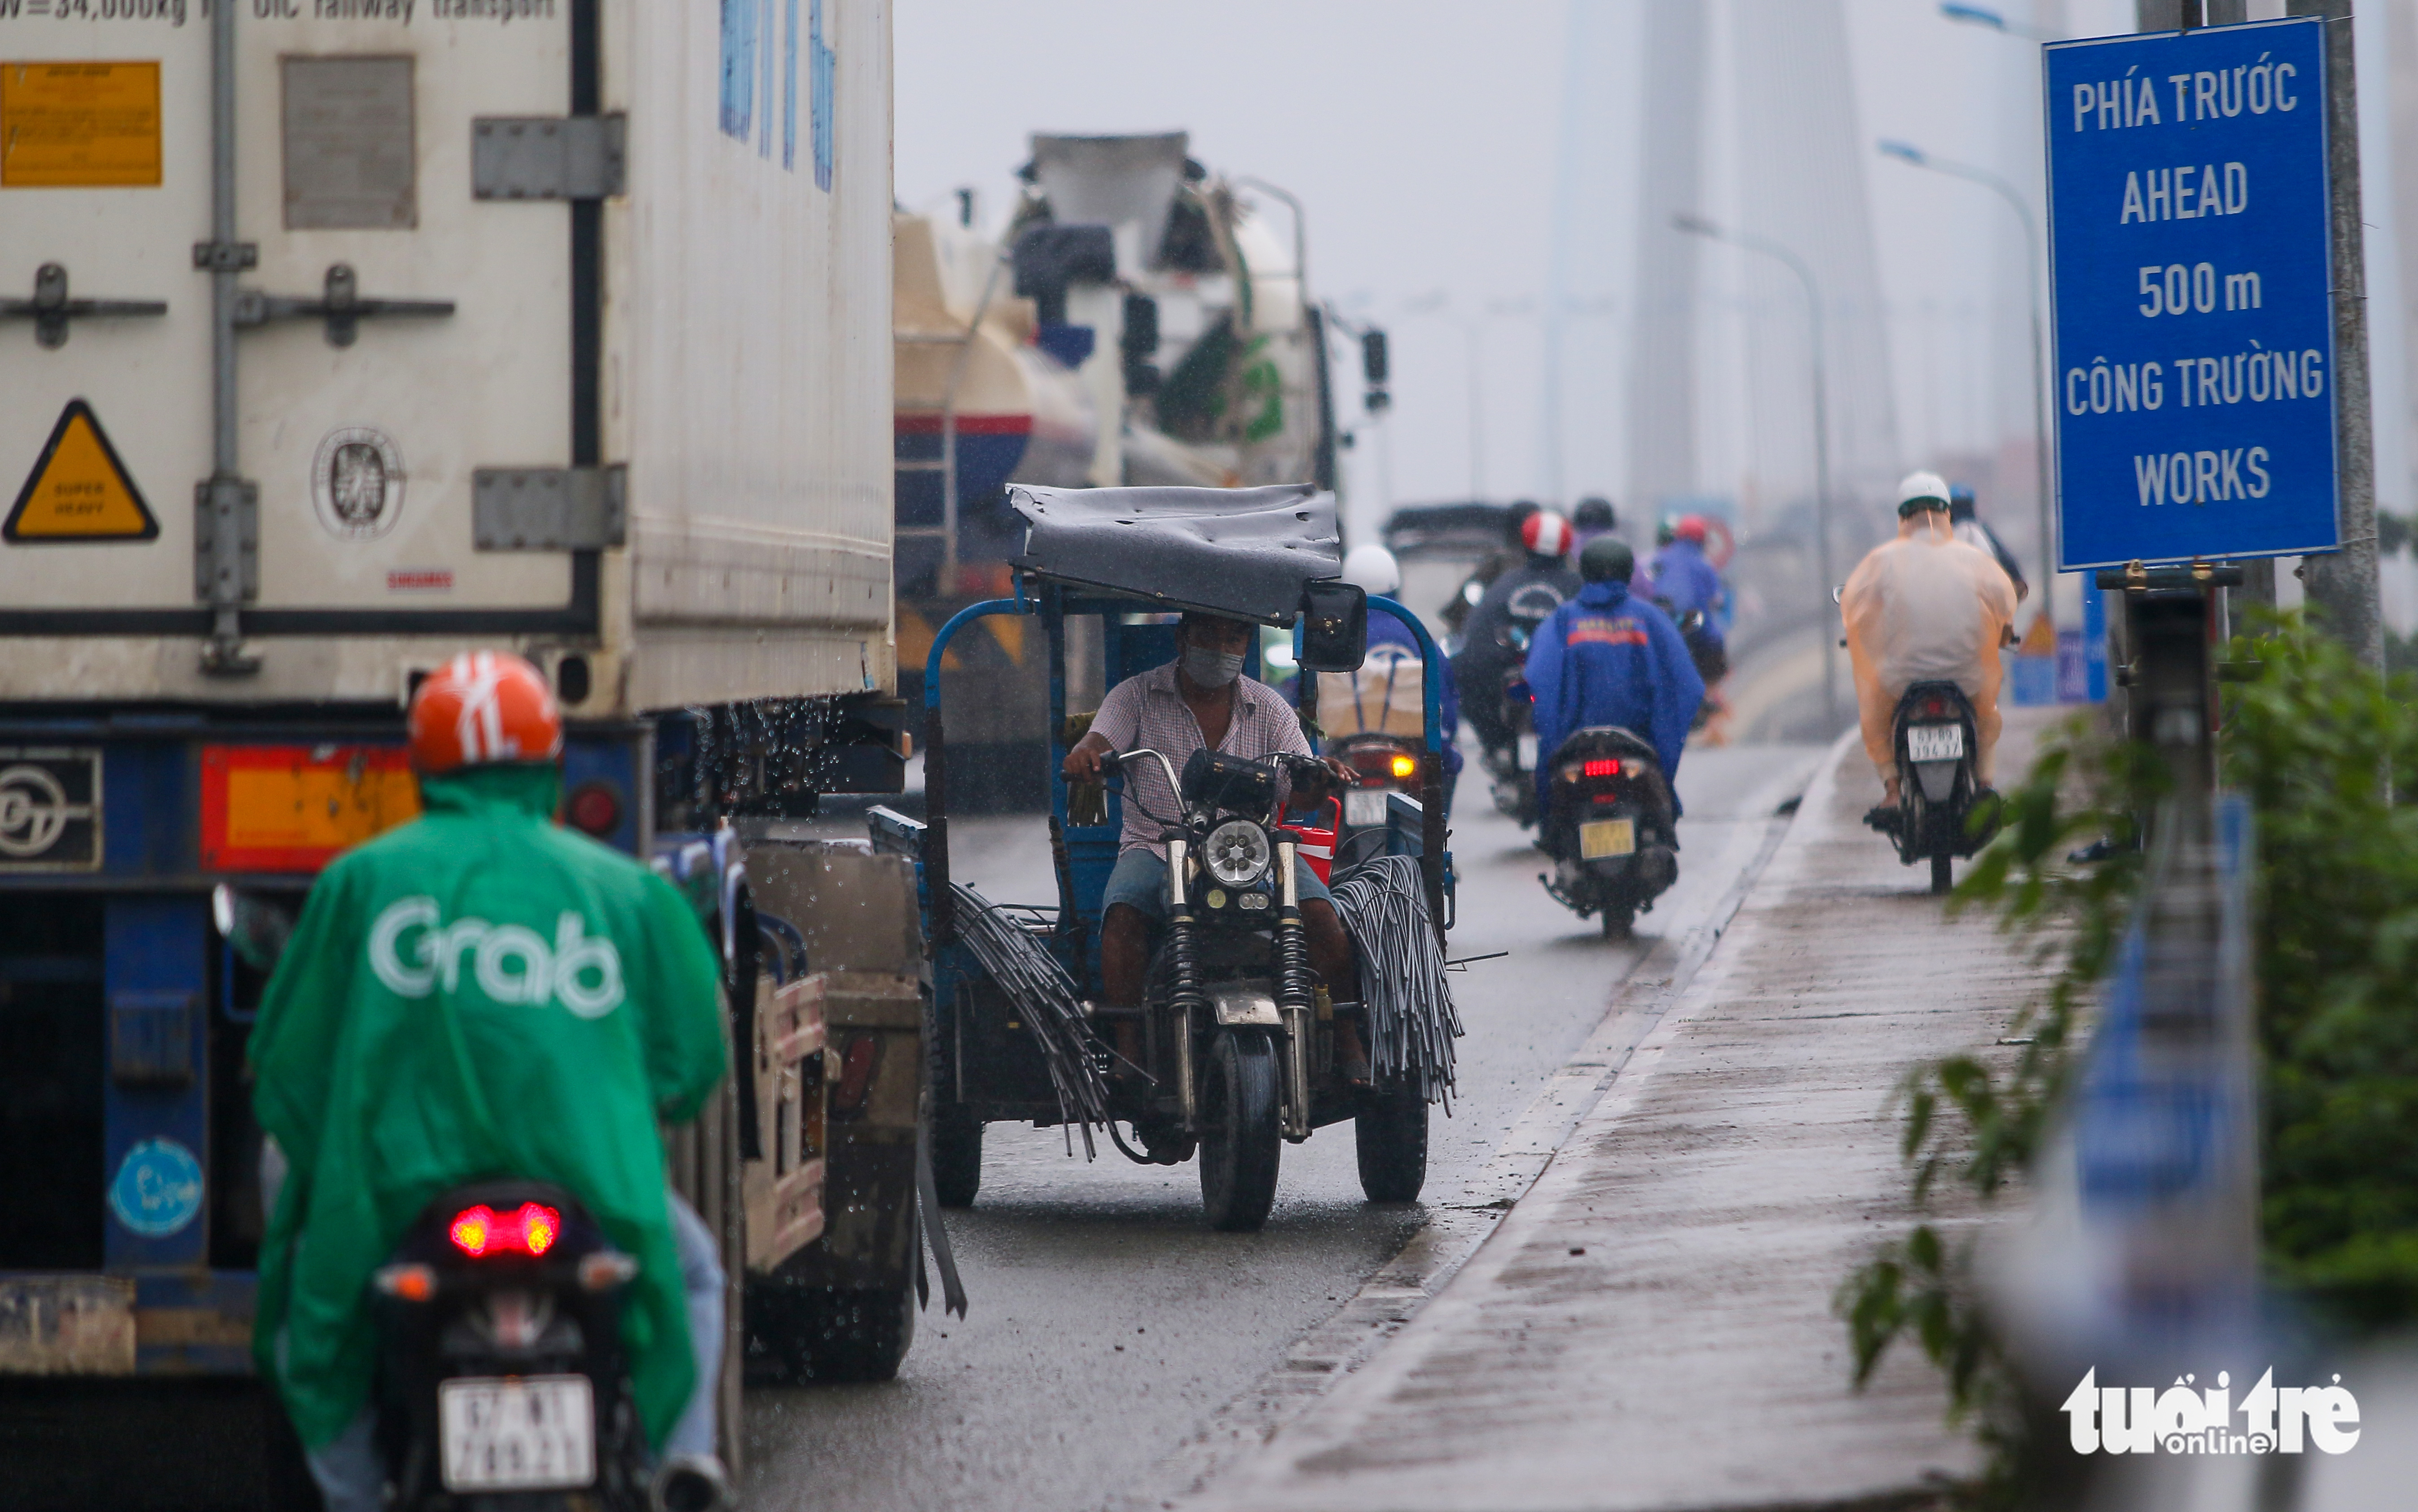 A motorcart travels in the wrong direction in an attempt to get away from the traffic jam on Phu My Bridge in Ho Chi Minh City, July 13, 2022. Photo: Chau Tuan / Tuoi Tre